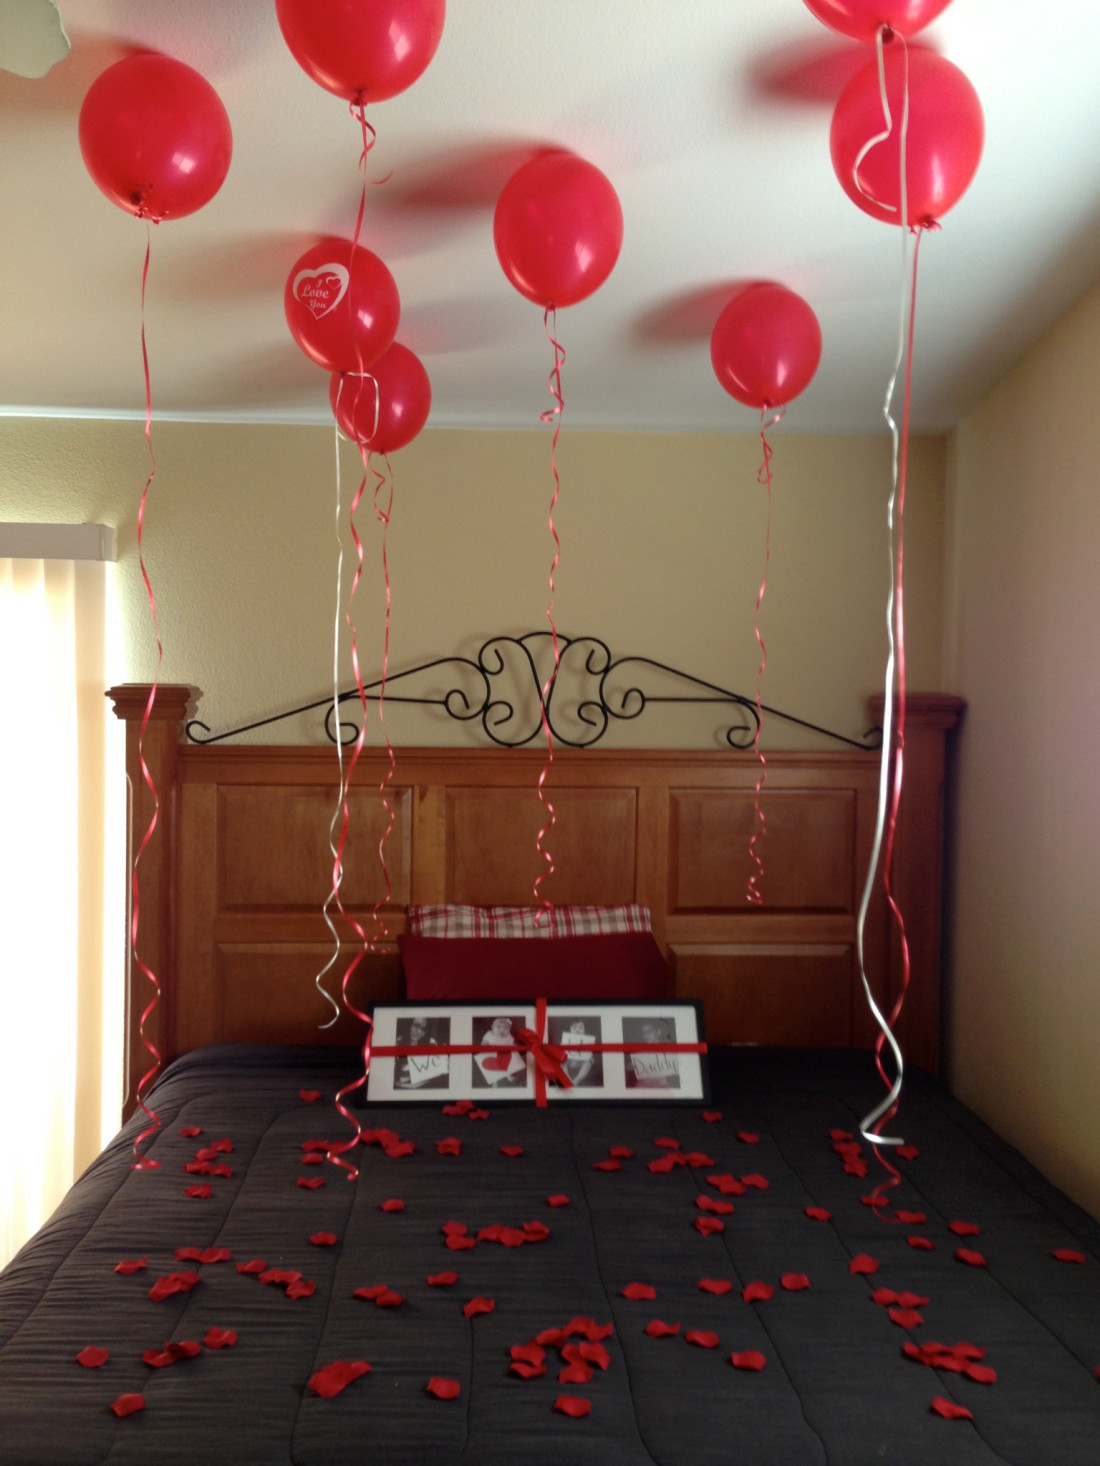 Valentines Gift Ideas For My Husband
 10 Creative Ways to Surprise Your Hubby for Valentine s